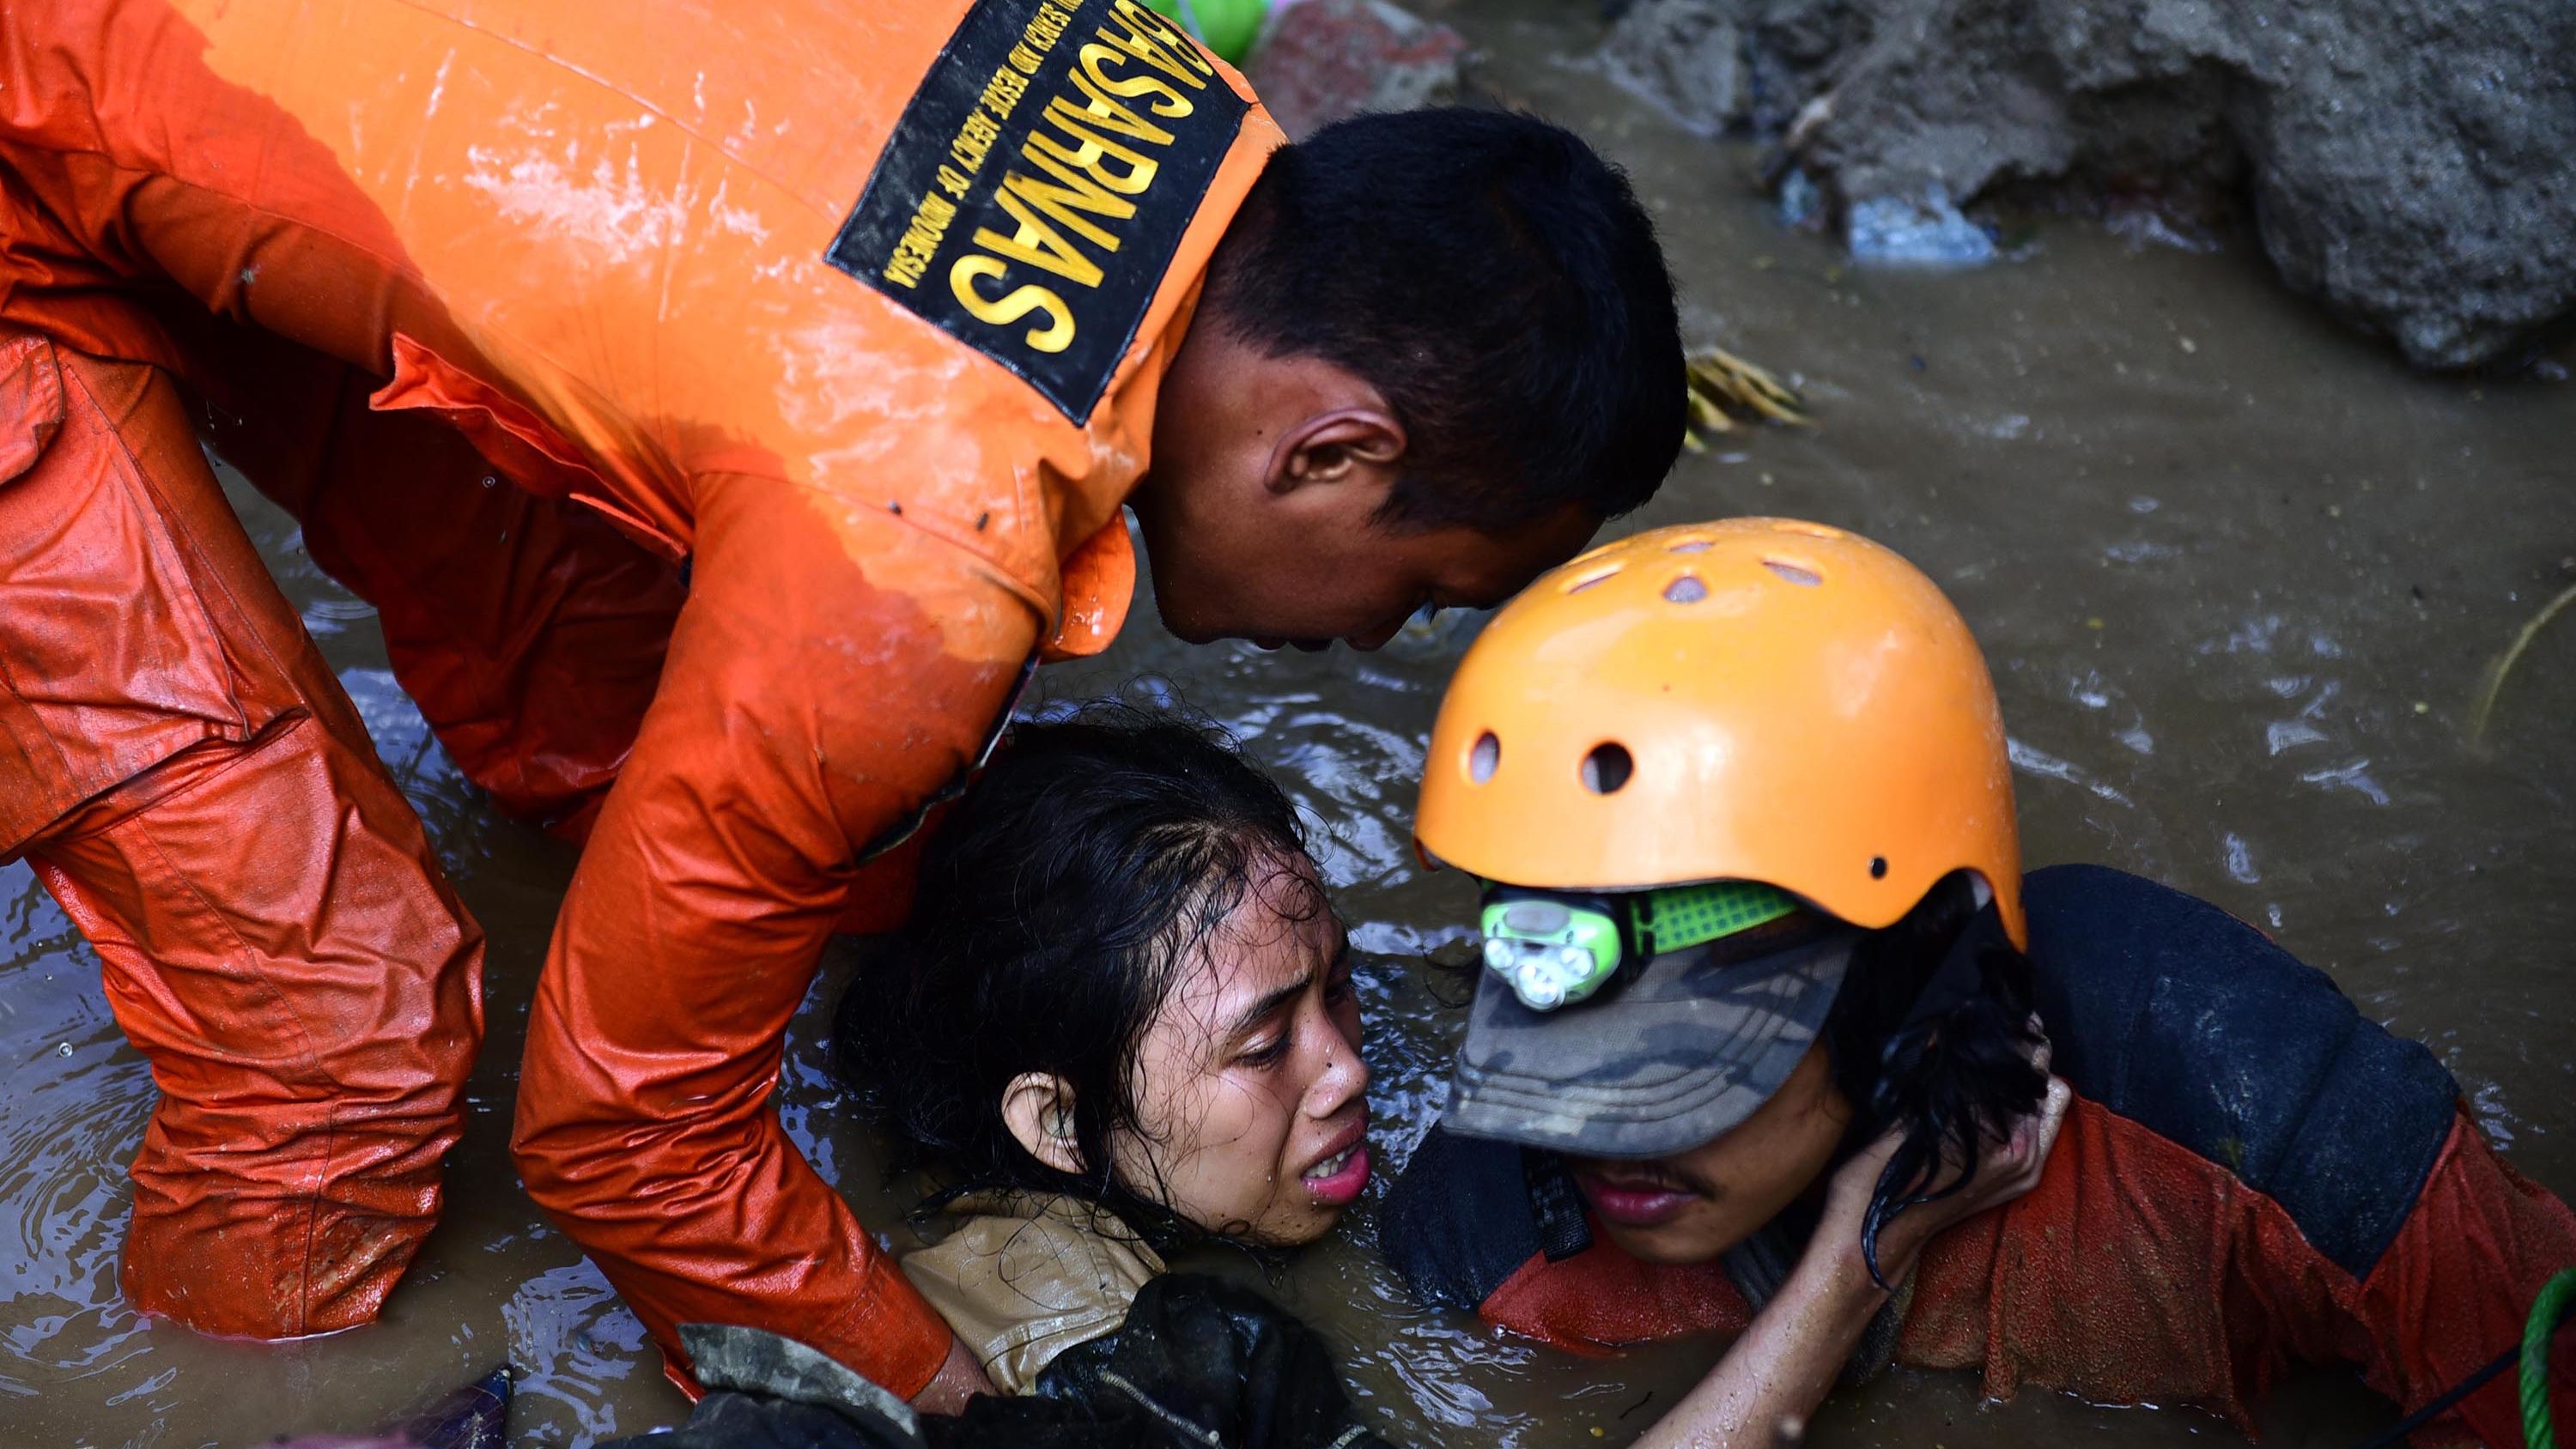 Rescuers try to free a 15-year-old earthquake survivor who was trapped in the flooded ruins of a collapsed house in Palu on Sunday, September 30.